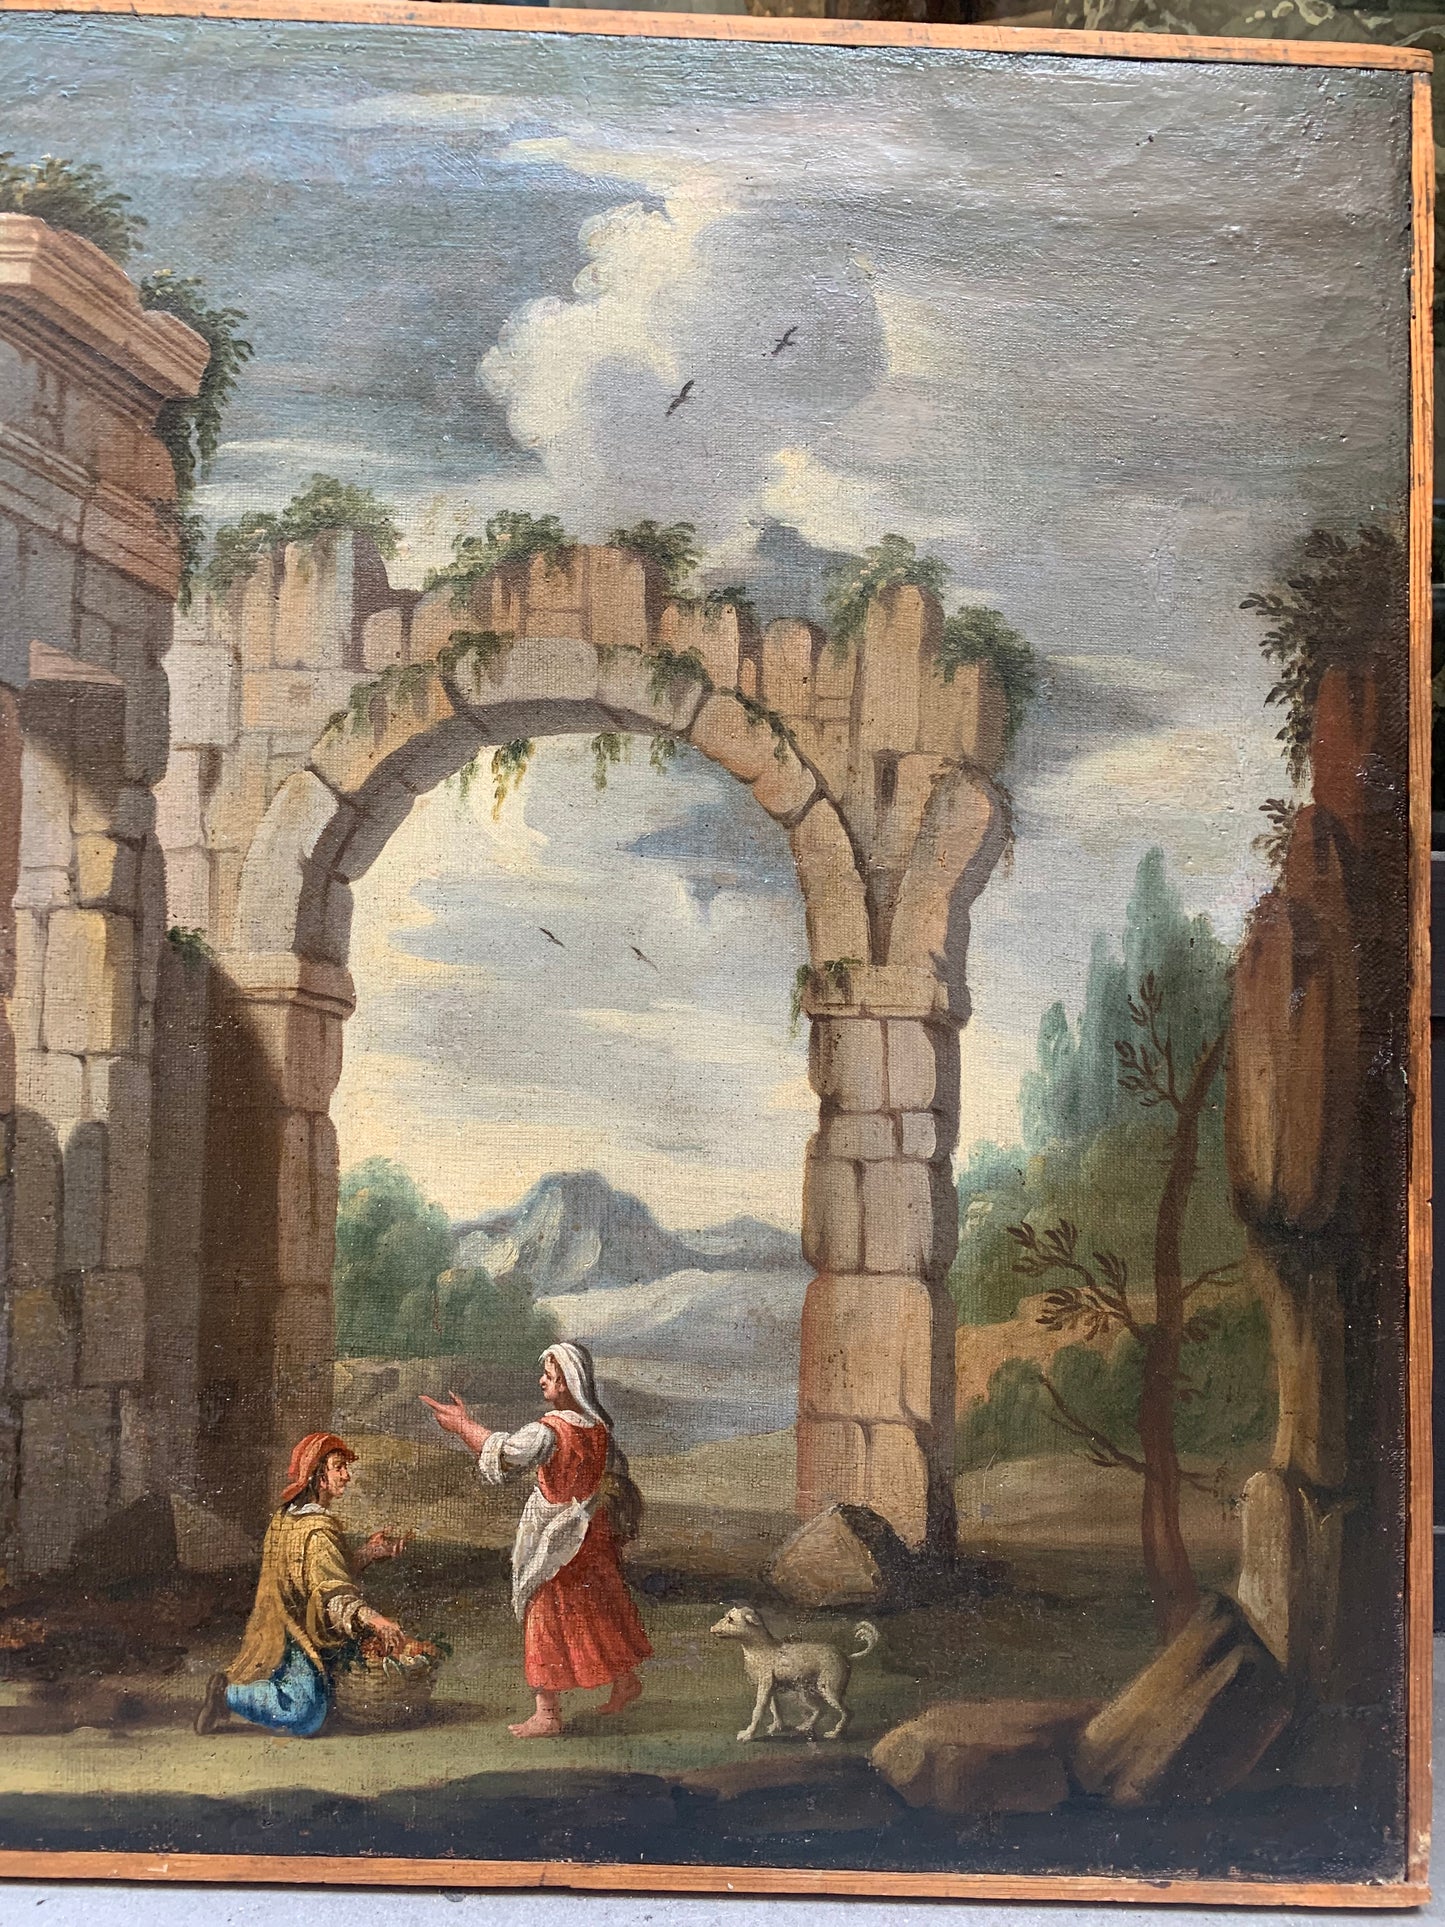 Architectural Capriccio with Ancient Roman Ruins,Column and Arches. Date of creation 1718.